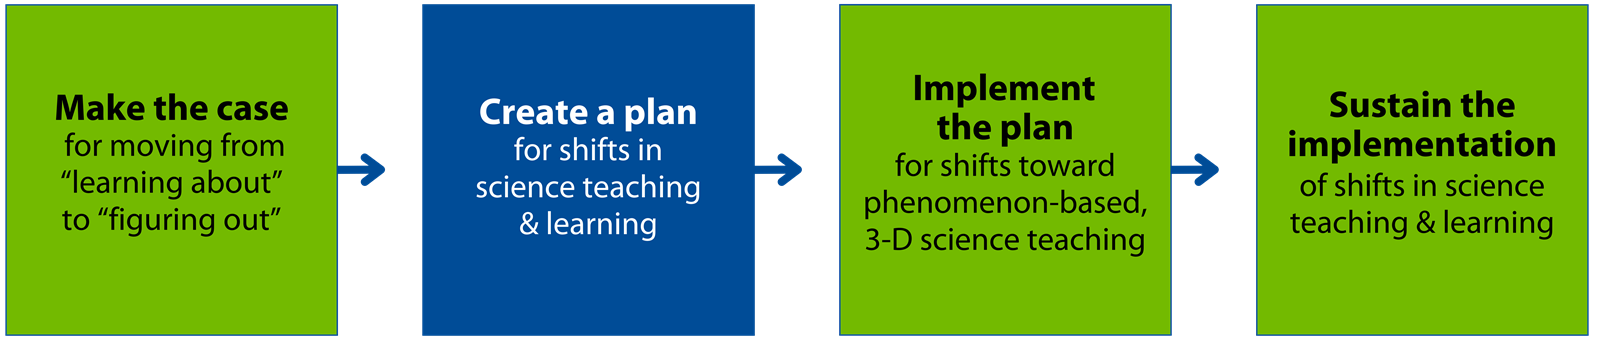 Create a plan for shifts in science teaching and learning